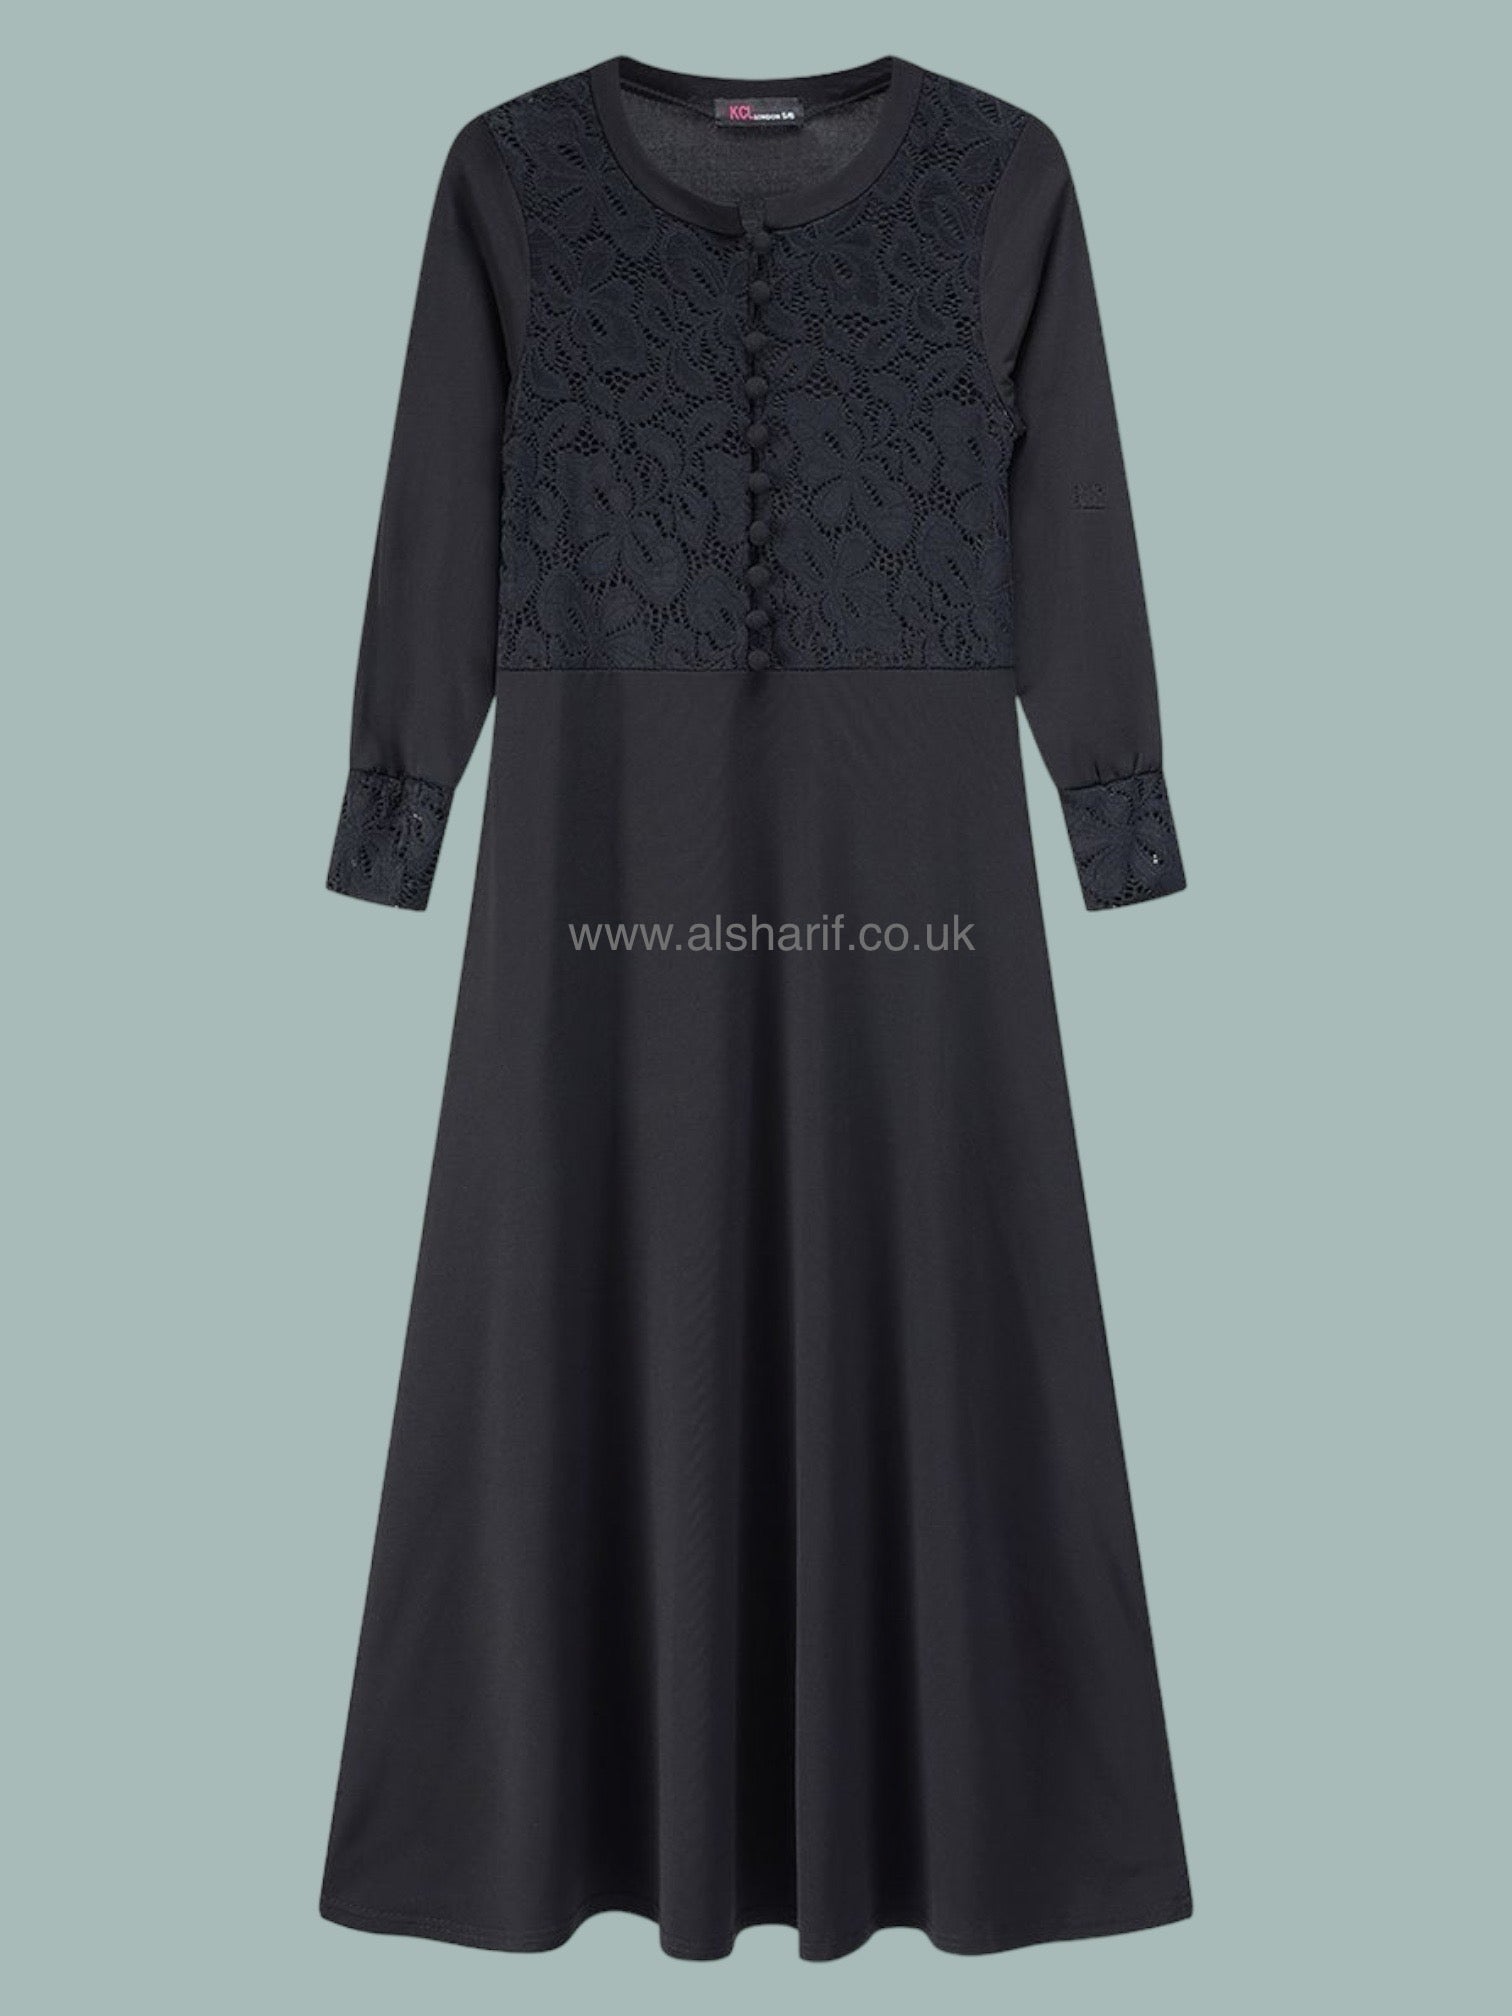 Girls Black Abaya - Jersey Stretchy - Floral Lace - buttoned  - GA97